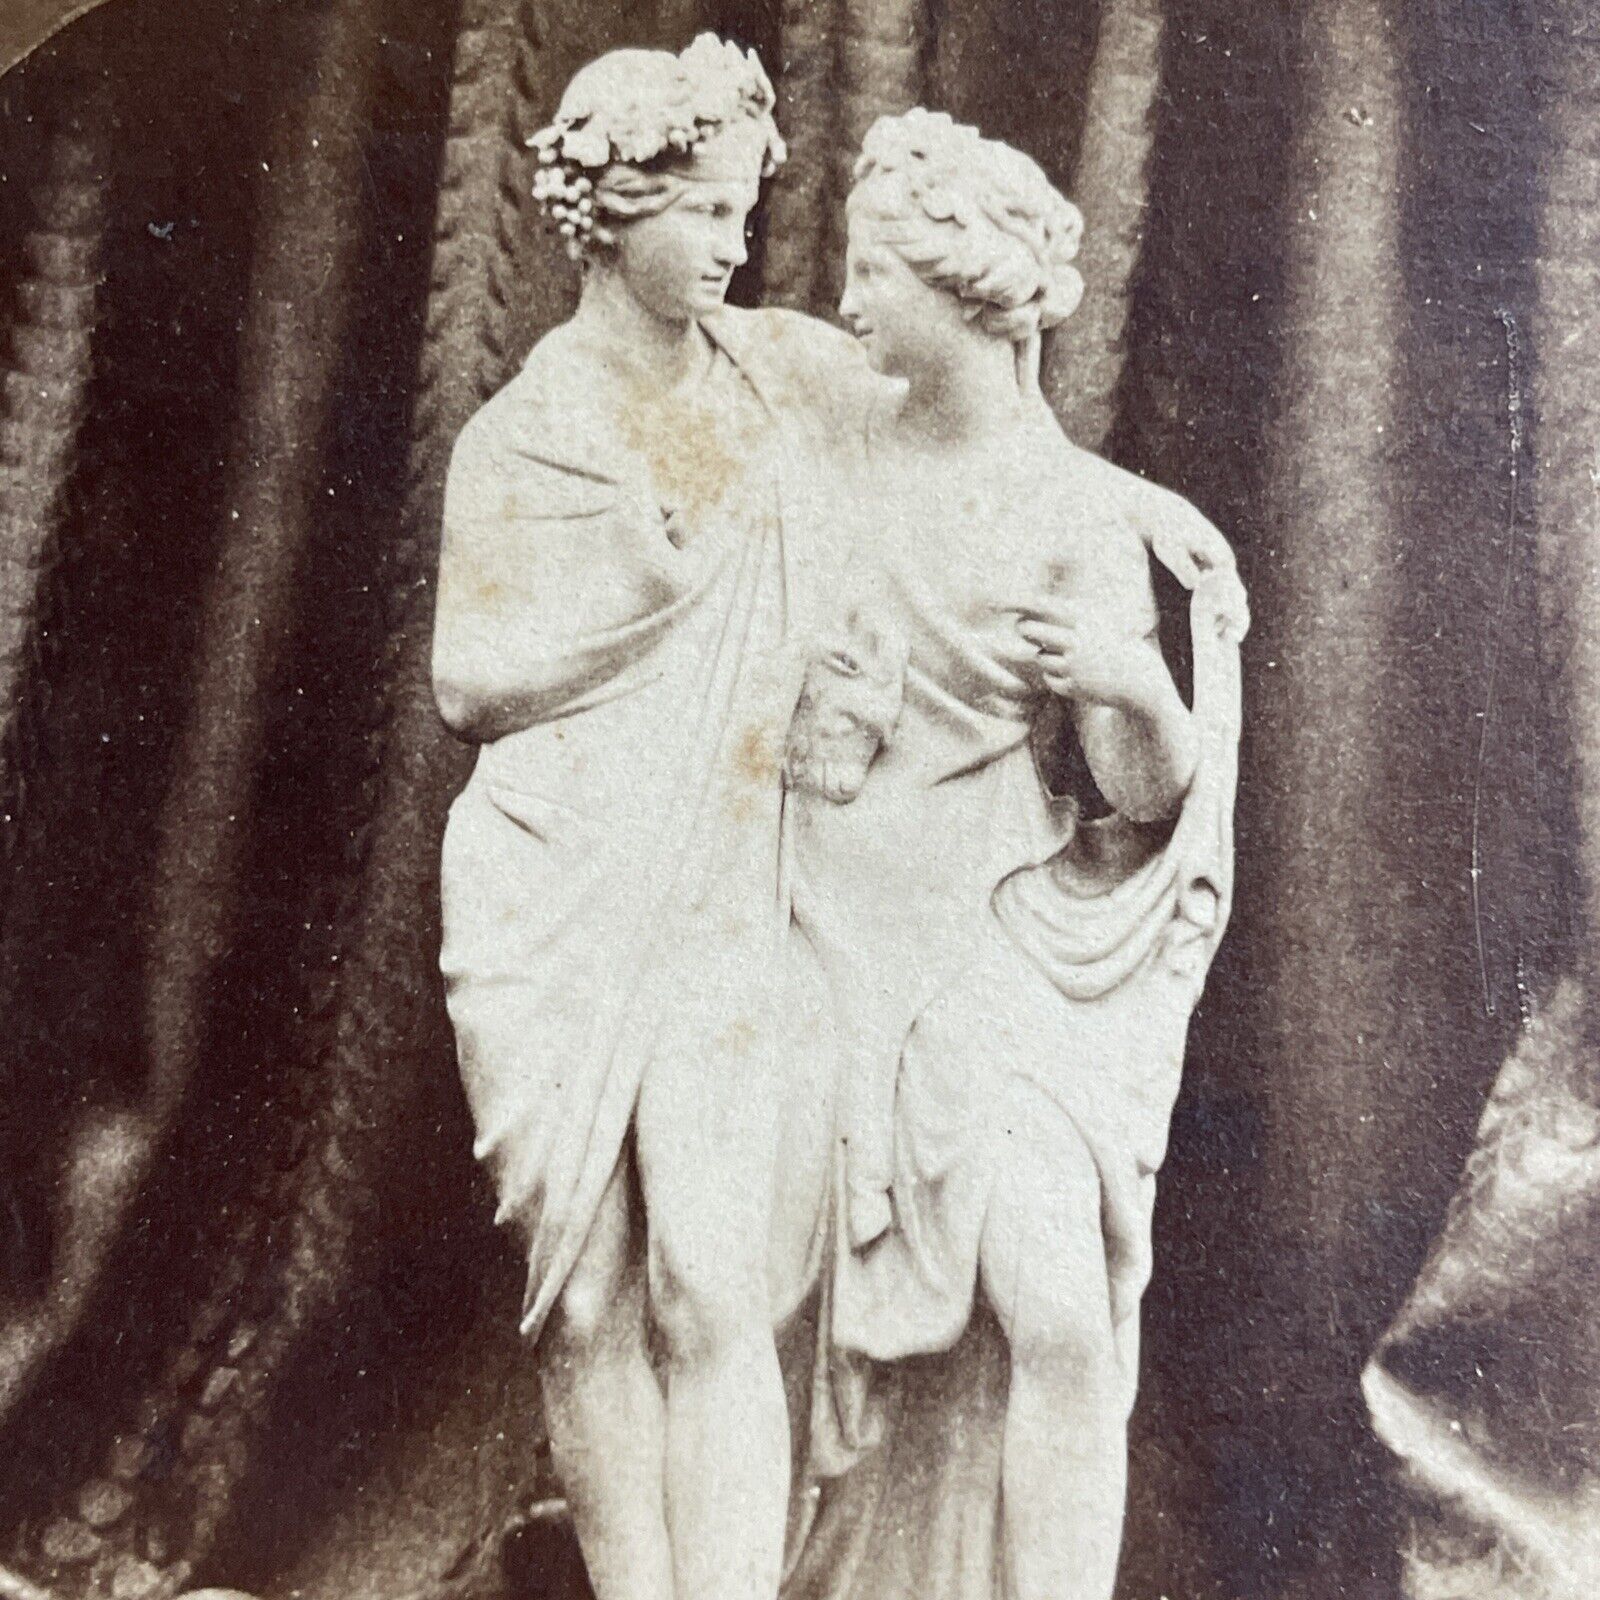 Antique 1870s Bacchus And Ariadne Marble Sculpture Stereoview Photo Card P4644